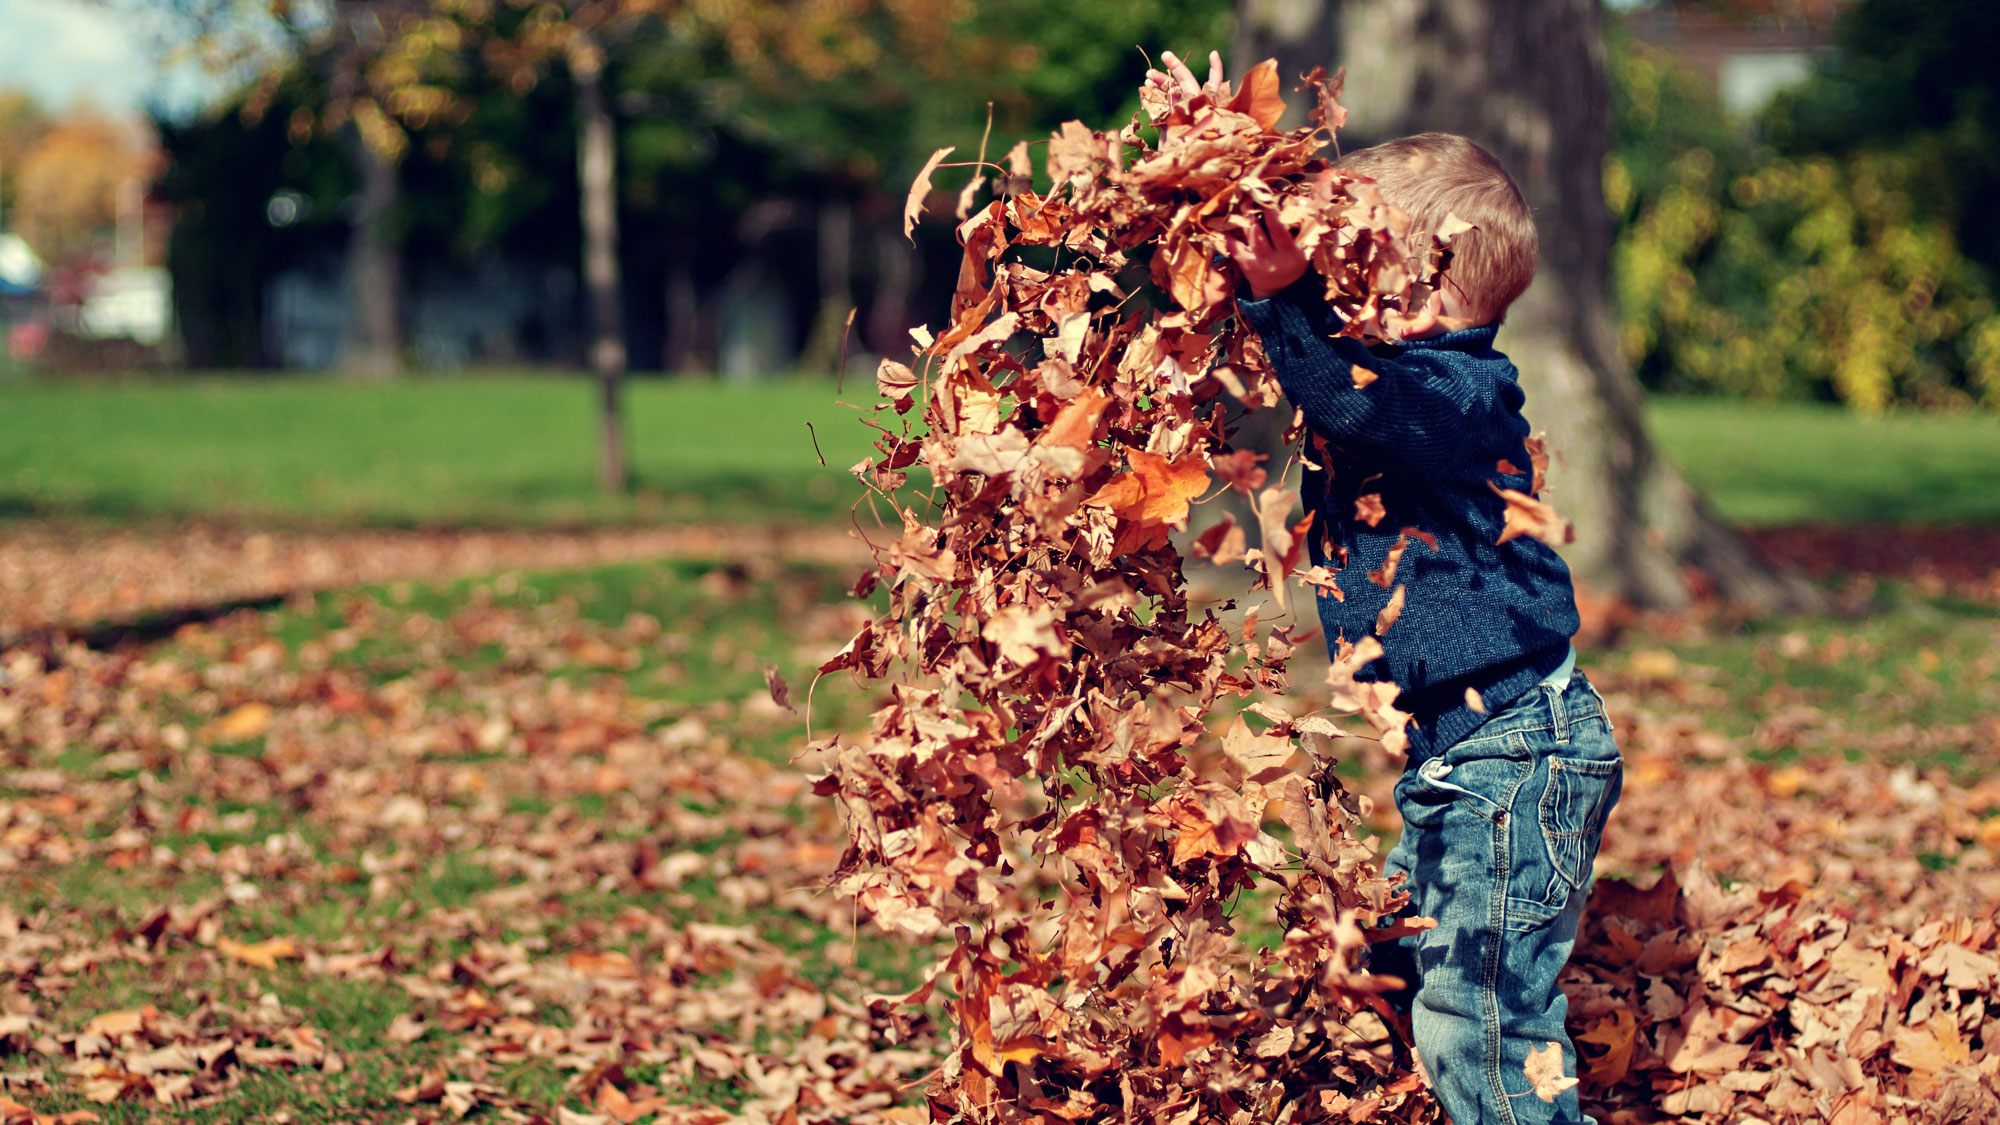 Young boy throwing leaves in the air in the park